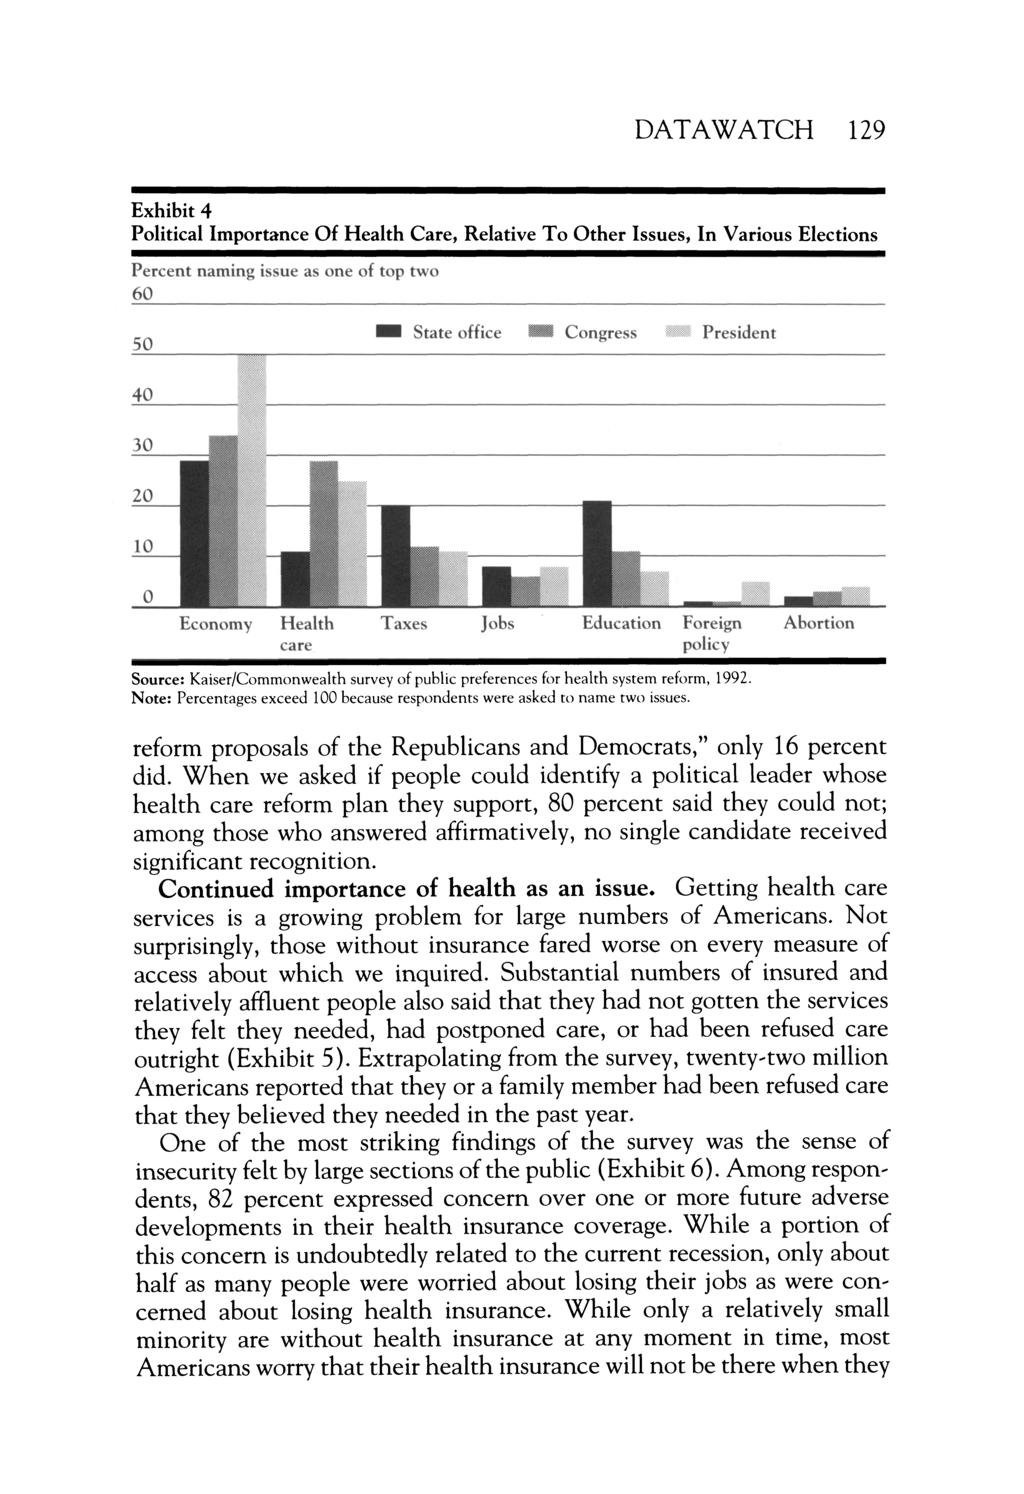 DATAWATCH 19 Exhibit 4 Political Importance Of Health Care, Relative To Other Issues, In Various Elections Note: Percentages exceed 100 because respondents were asked to name two issues.